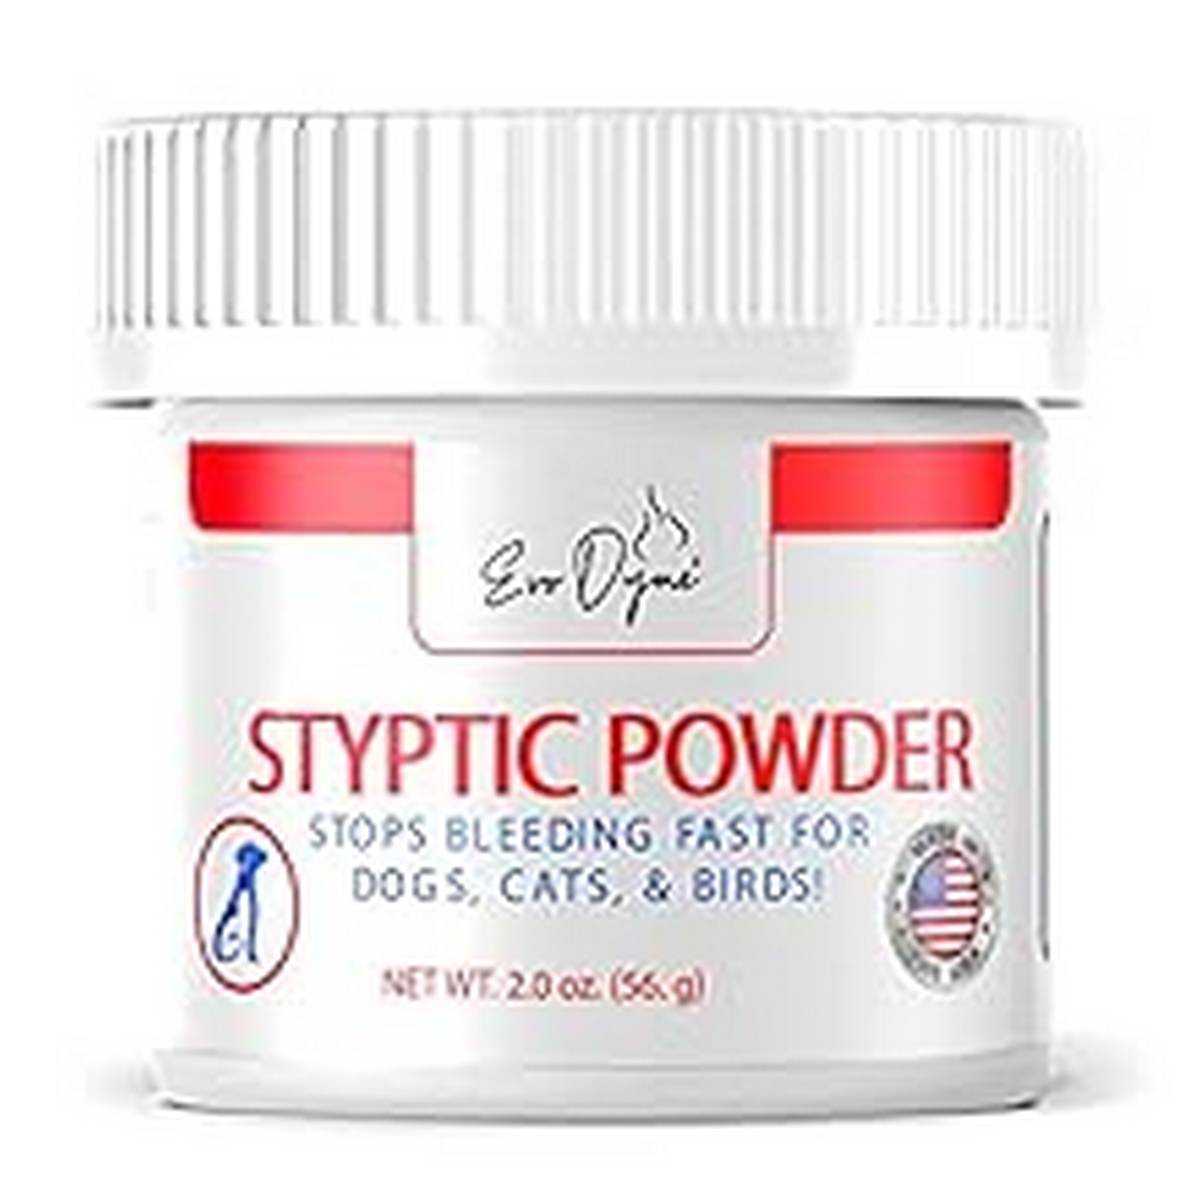 Supplies_Styptic Powder for Dogs Cats and Birds oz by Evo Dyne Fast-Acting Blood Stop Powder for Pets Quick Stop Bleeding Powder for Dog Nail Clipping Grooming Cuts and More